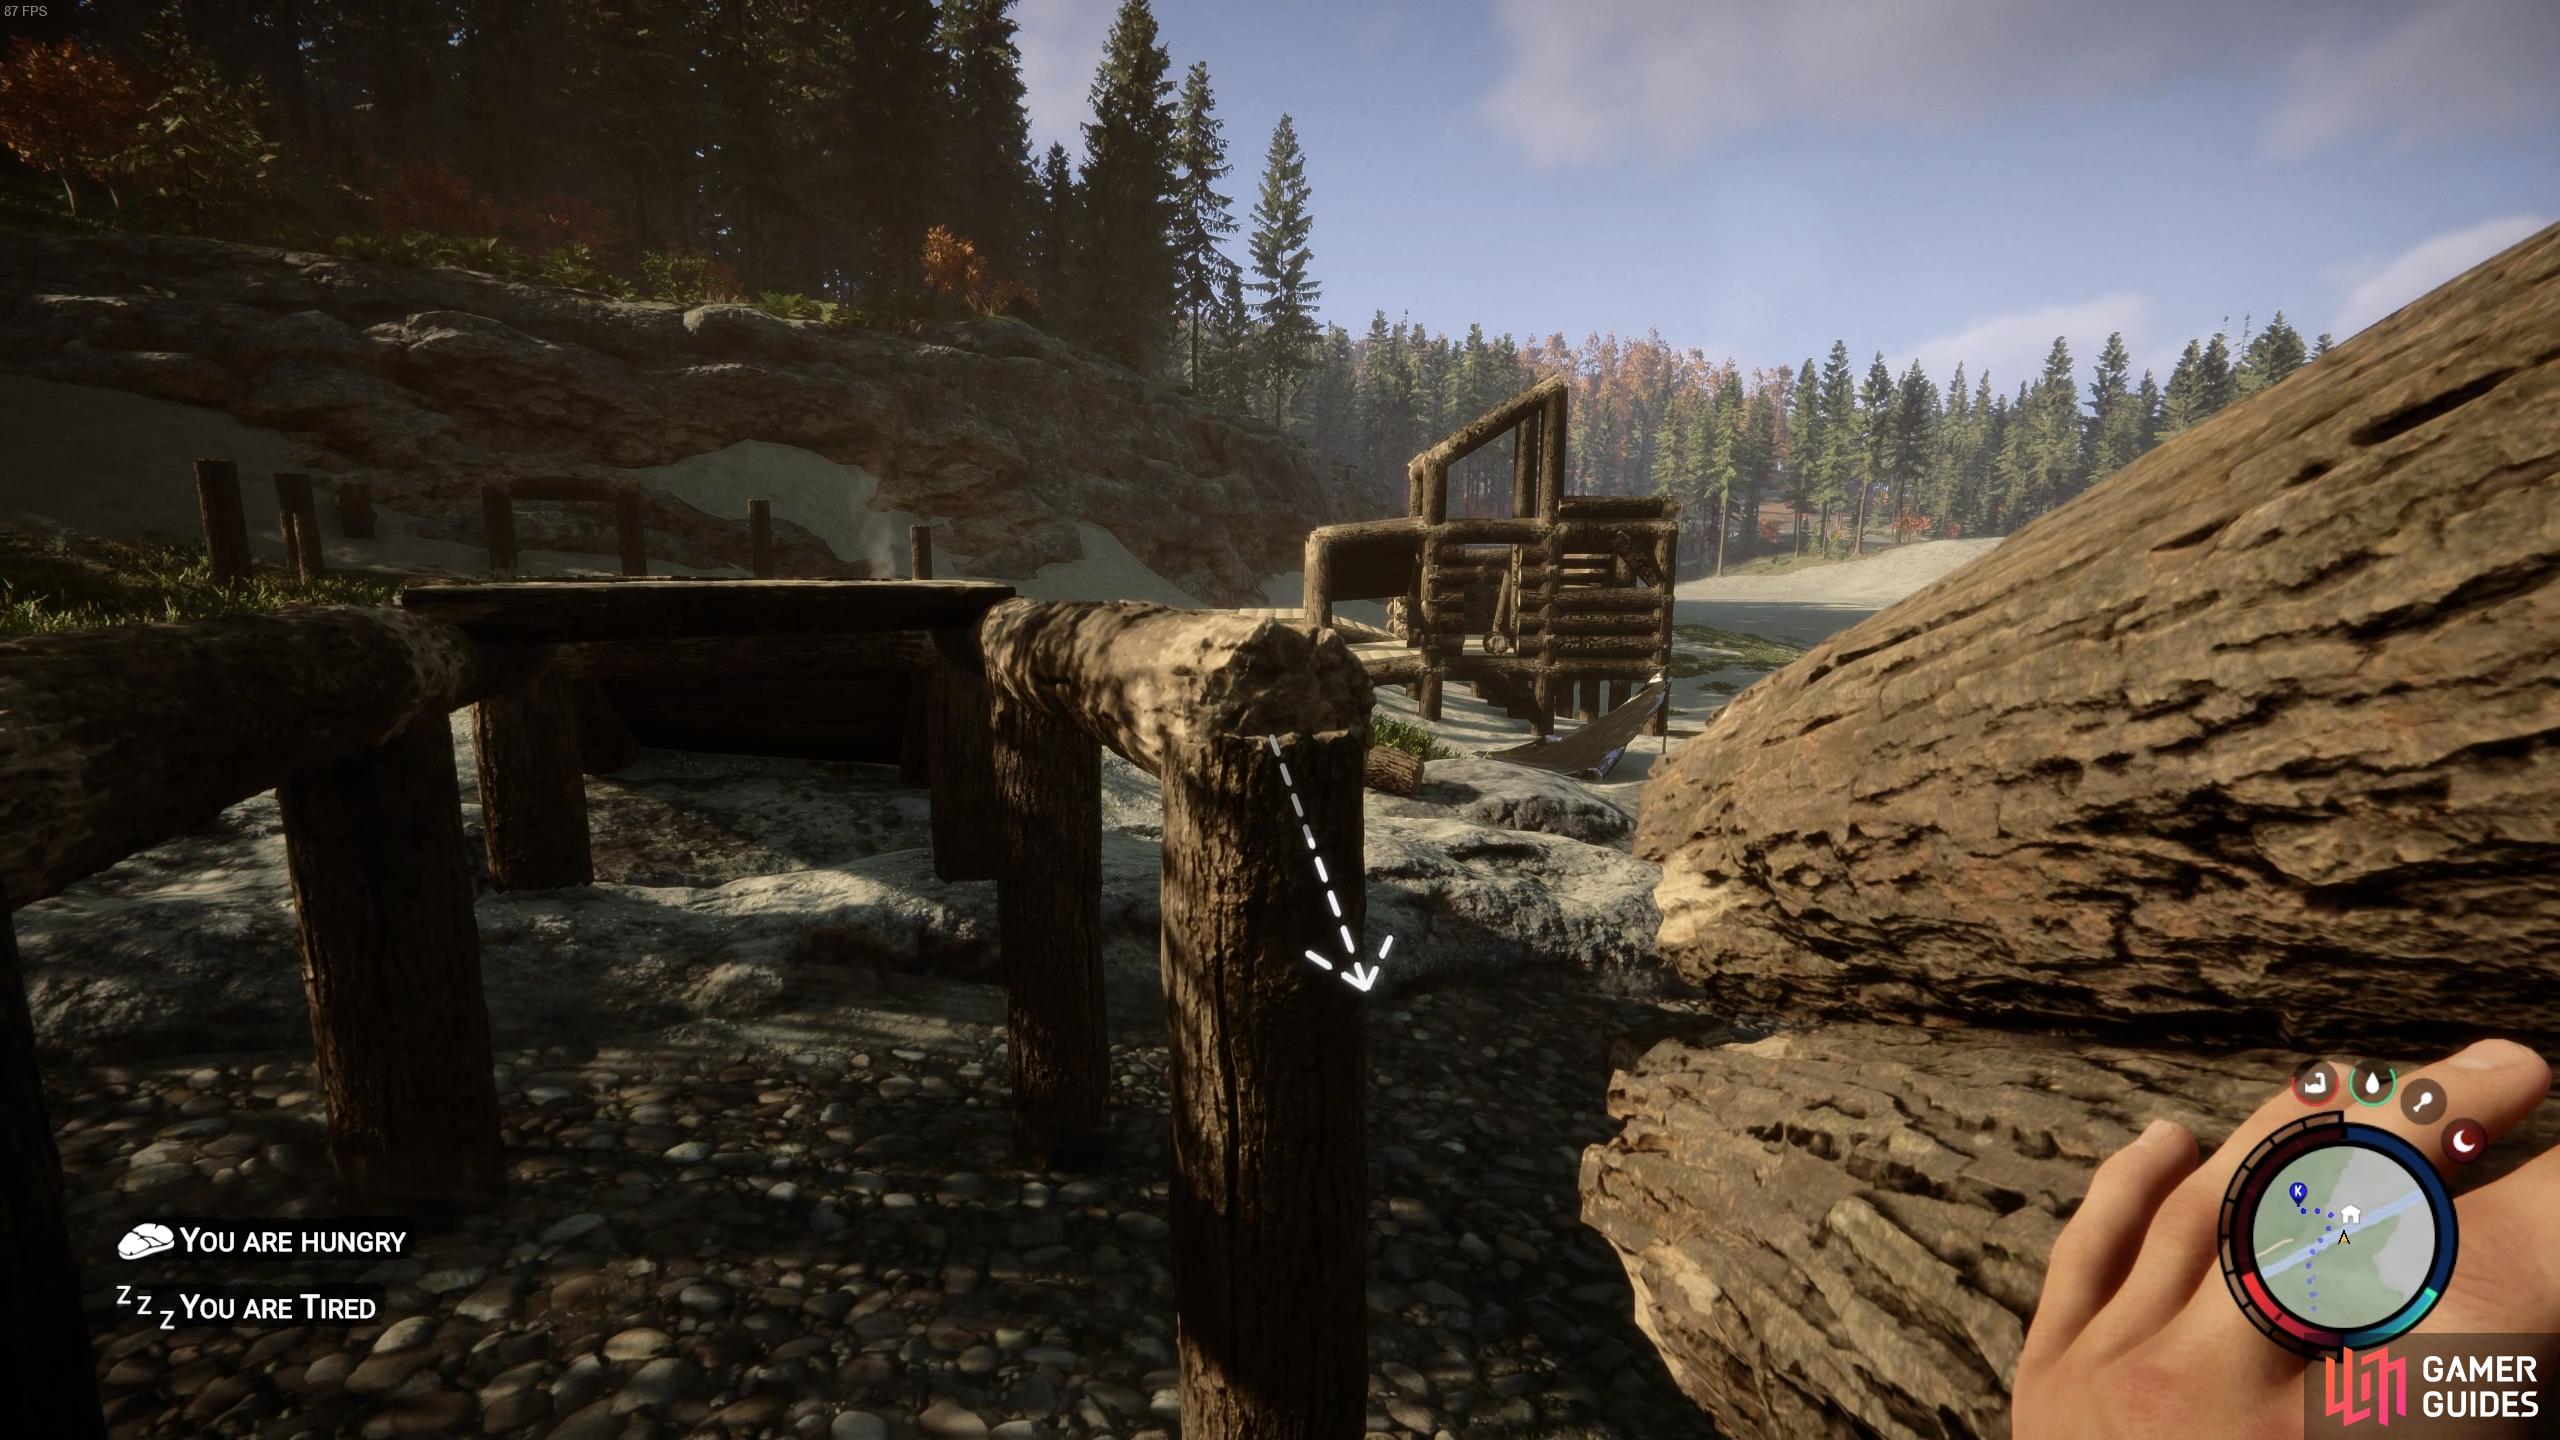 You can place logs diagonally from vertical logs to create a structure for a ramp or steps.